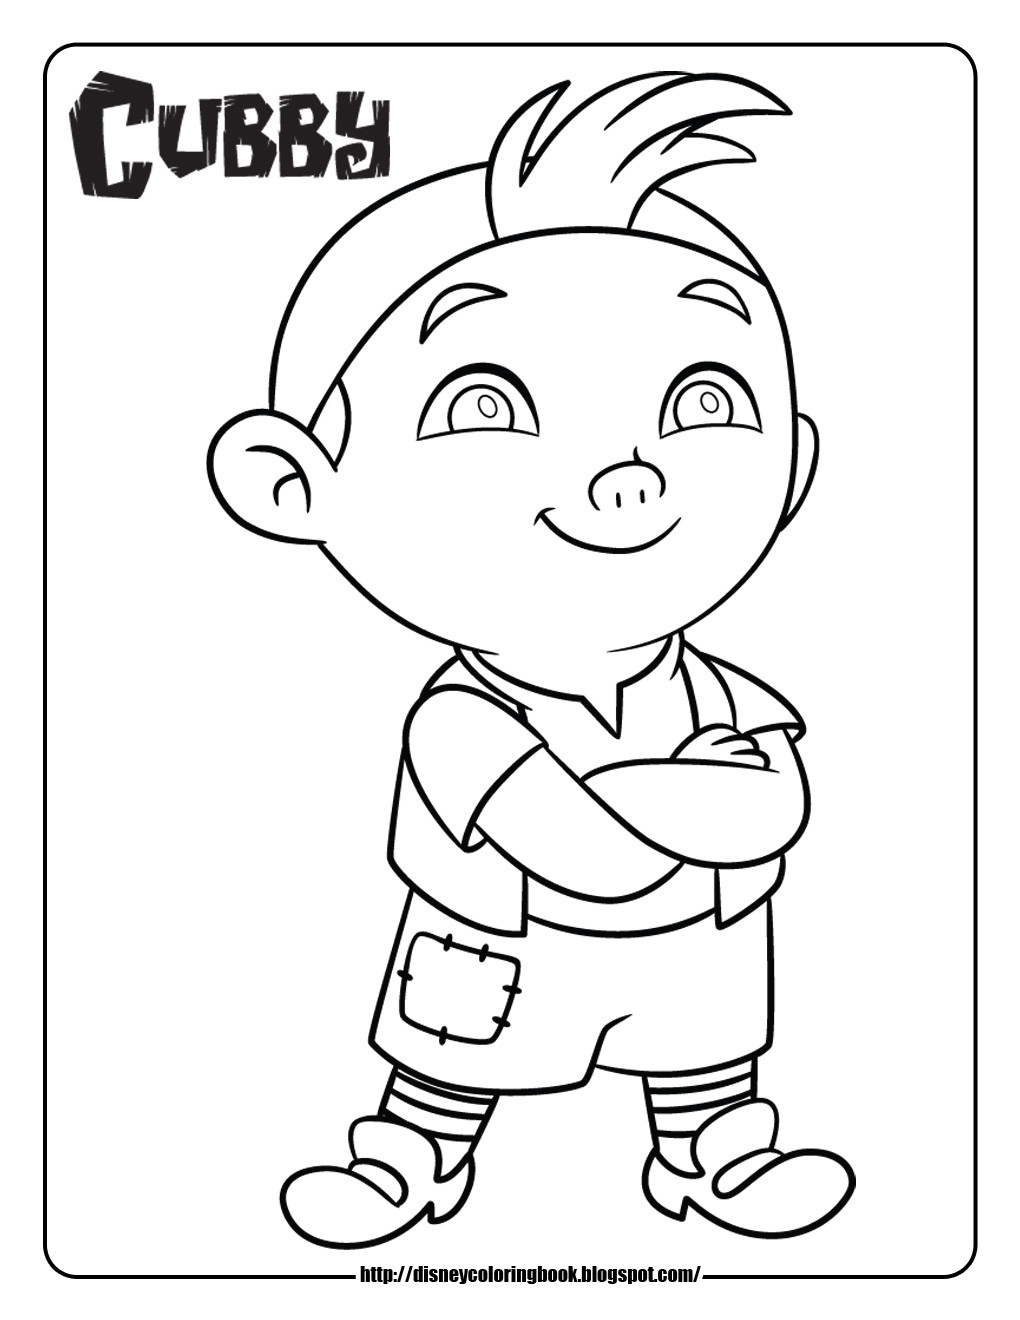 Jake And The Neverland Pirates Coloring Pages
 Jake and the Neverland Pirates 1 Free Disney Coloring